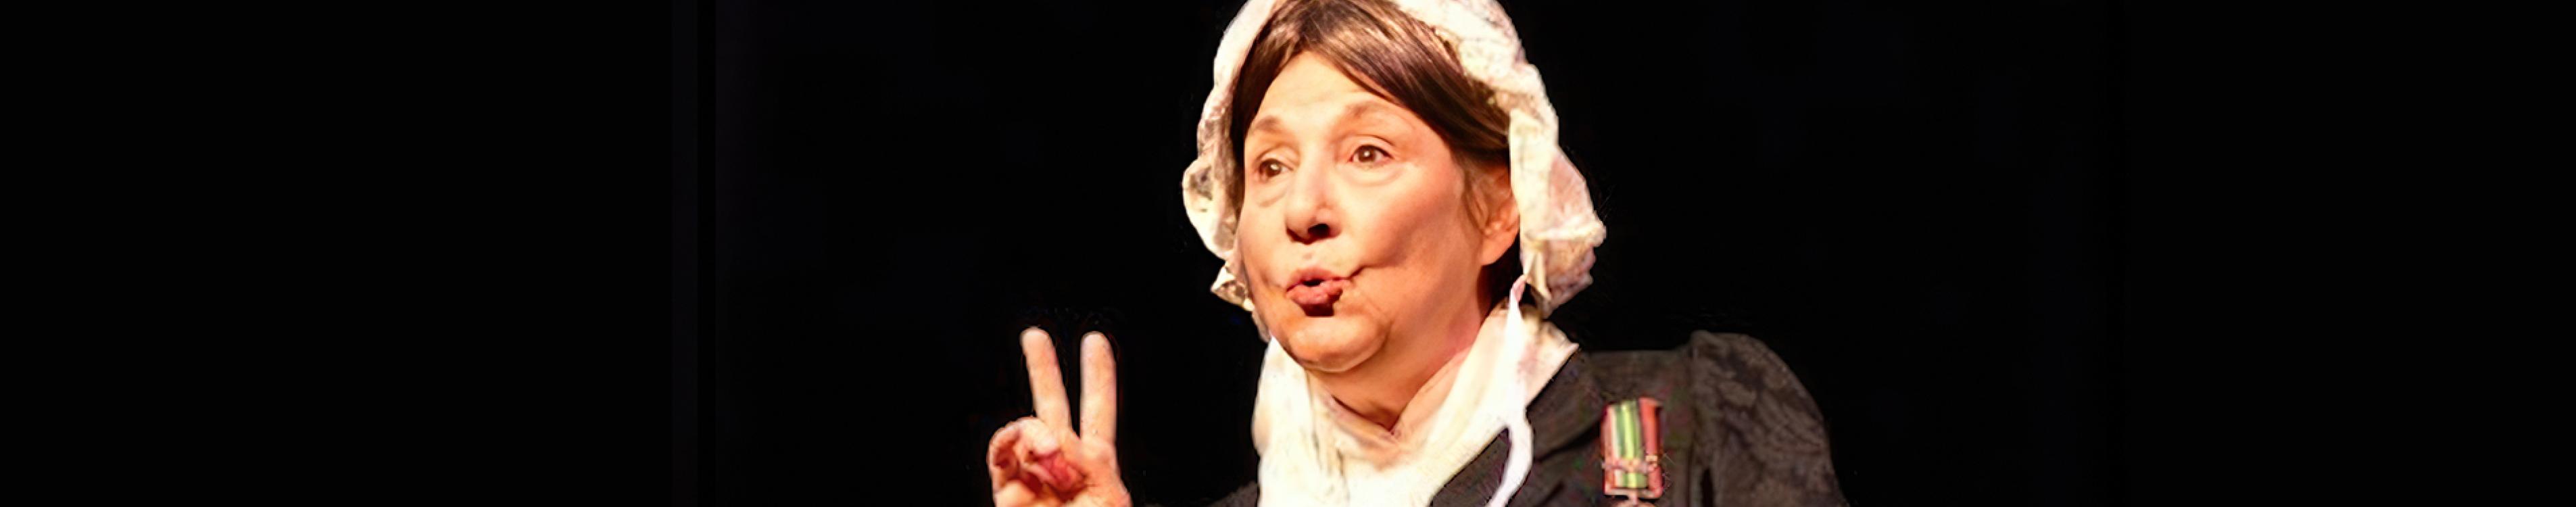 Candy Campbell ’70 as Florence Nightingale.